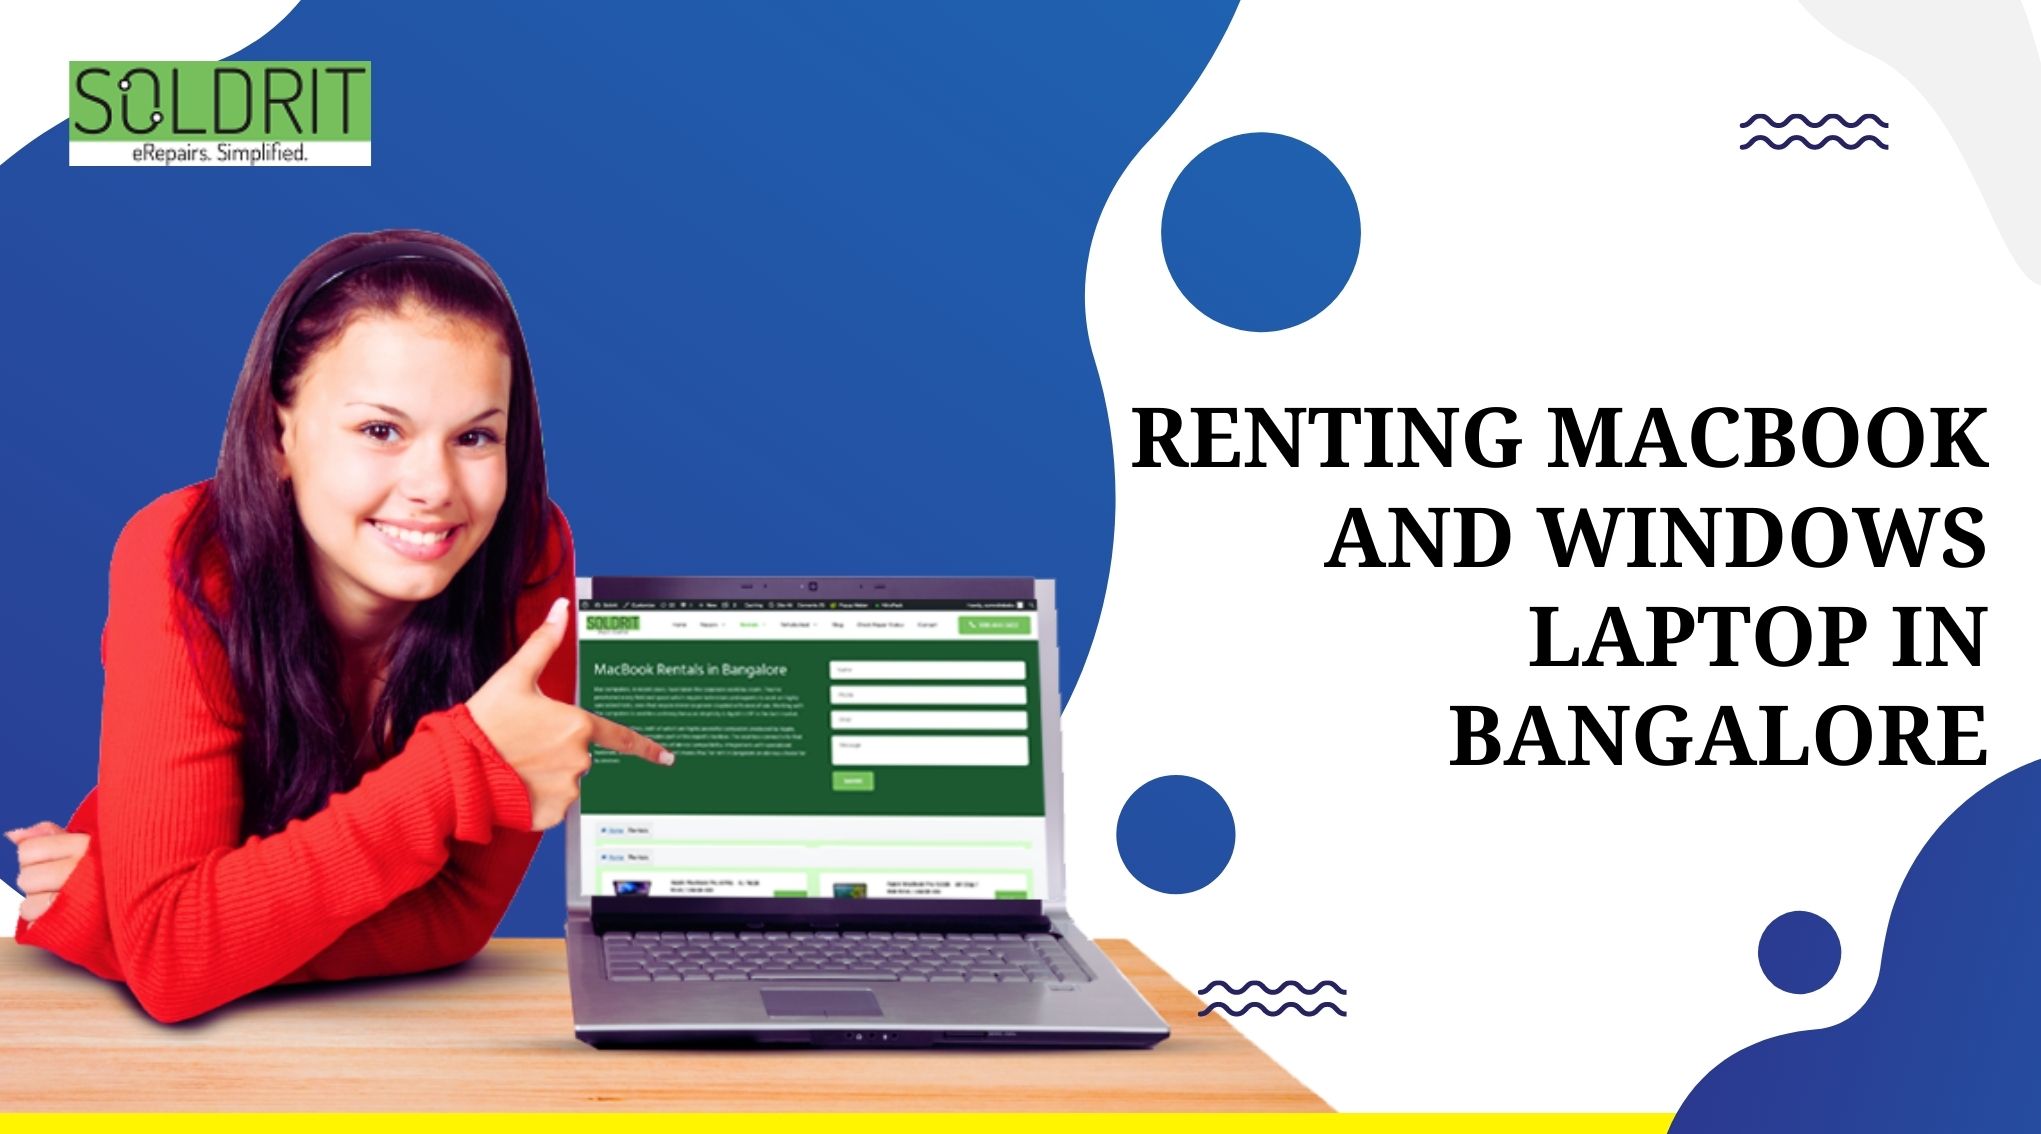 Renting MacBook and Windows Laptops in Bangalore: A Flexible and Cost-effective Solution